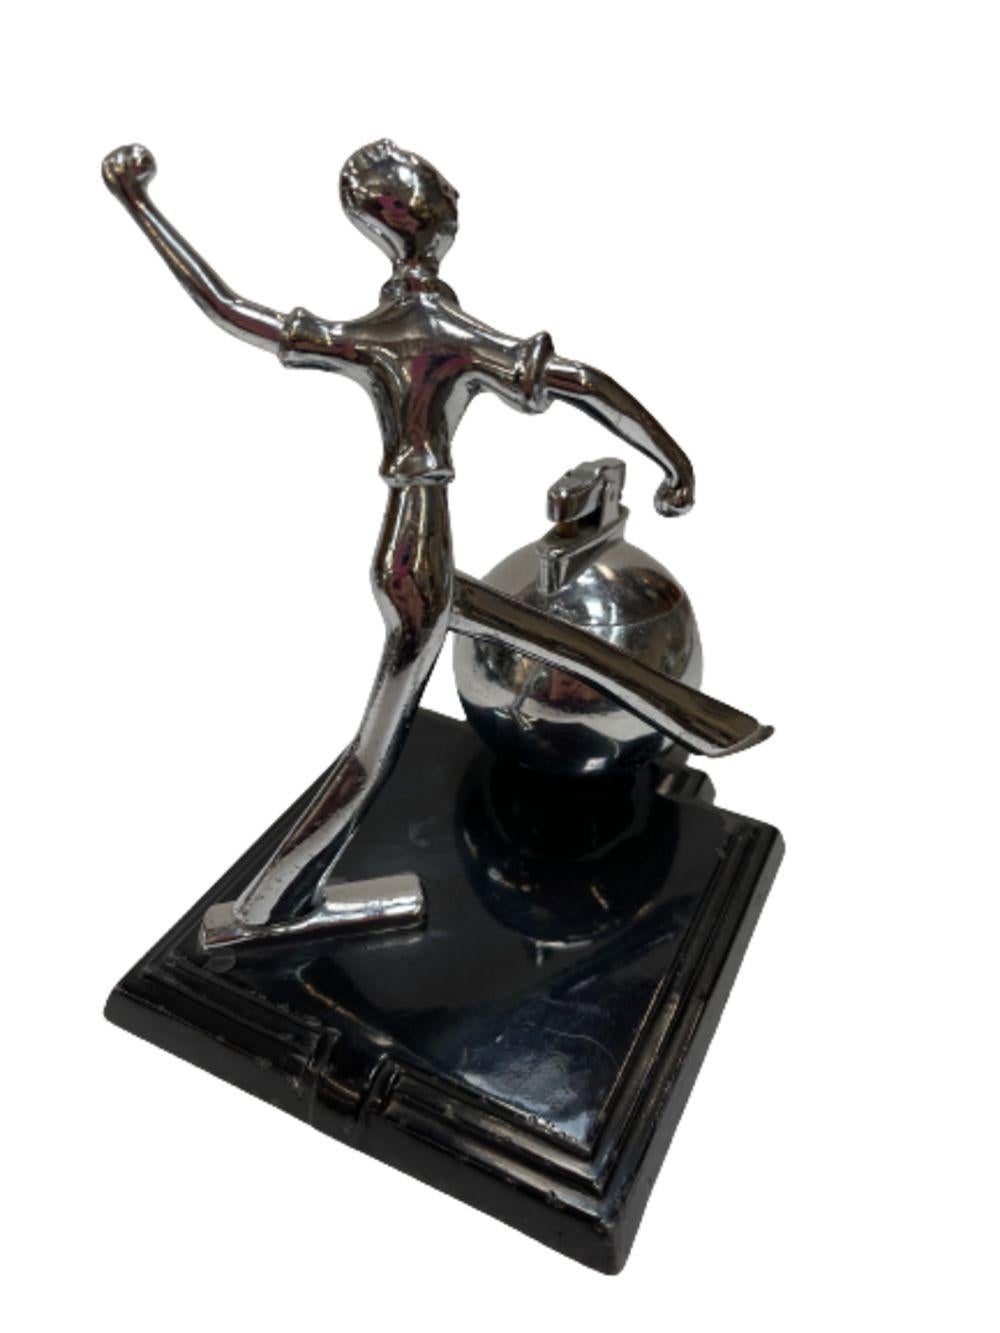 Art Deco Ball Player Table Table Lighter with Base by Ronson In Excellent Condition For Sale In Van Nuys, CA